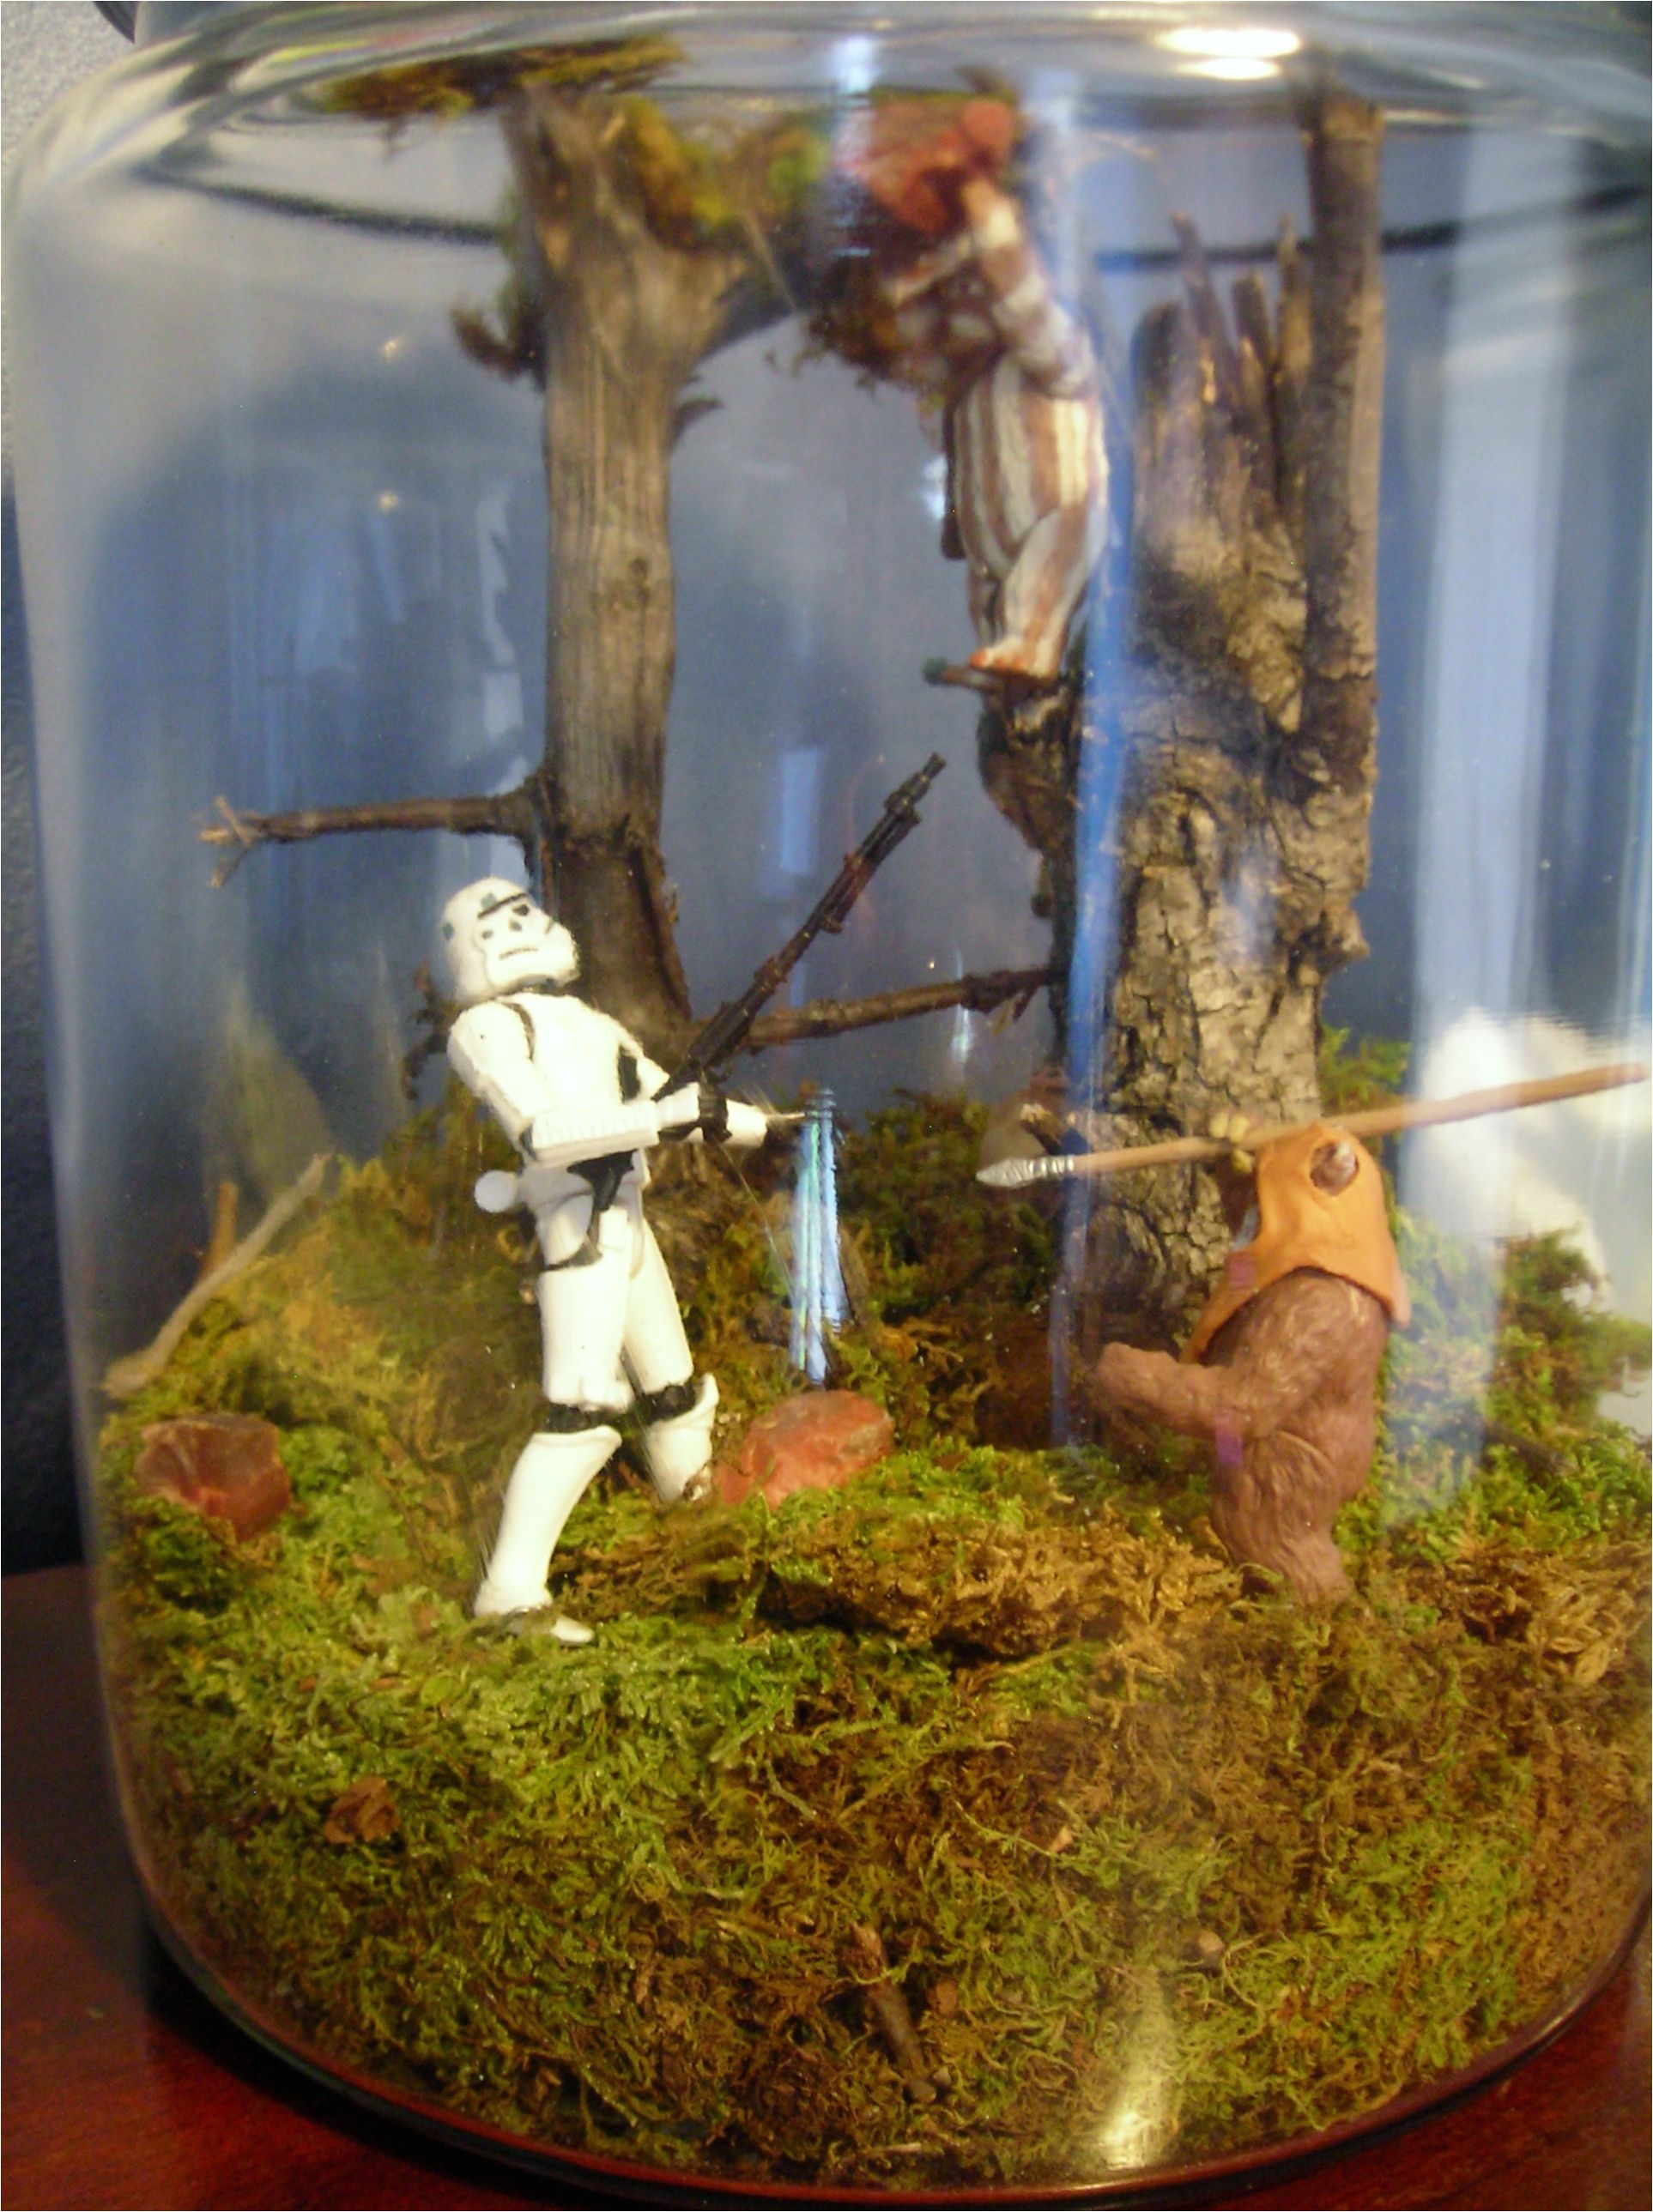 Star Wars Fish Tank Decor is It Crazy that I Want Endor Terrariums for My Wedding We are